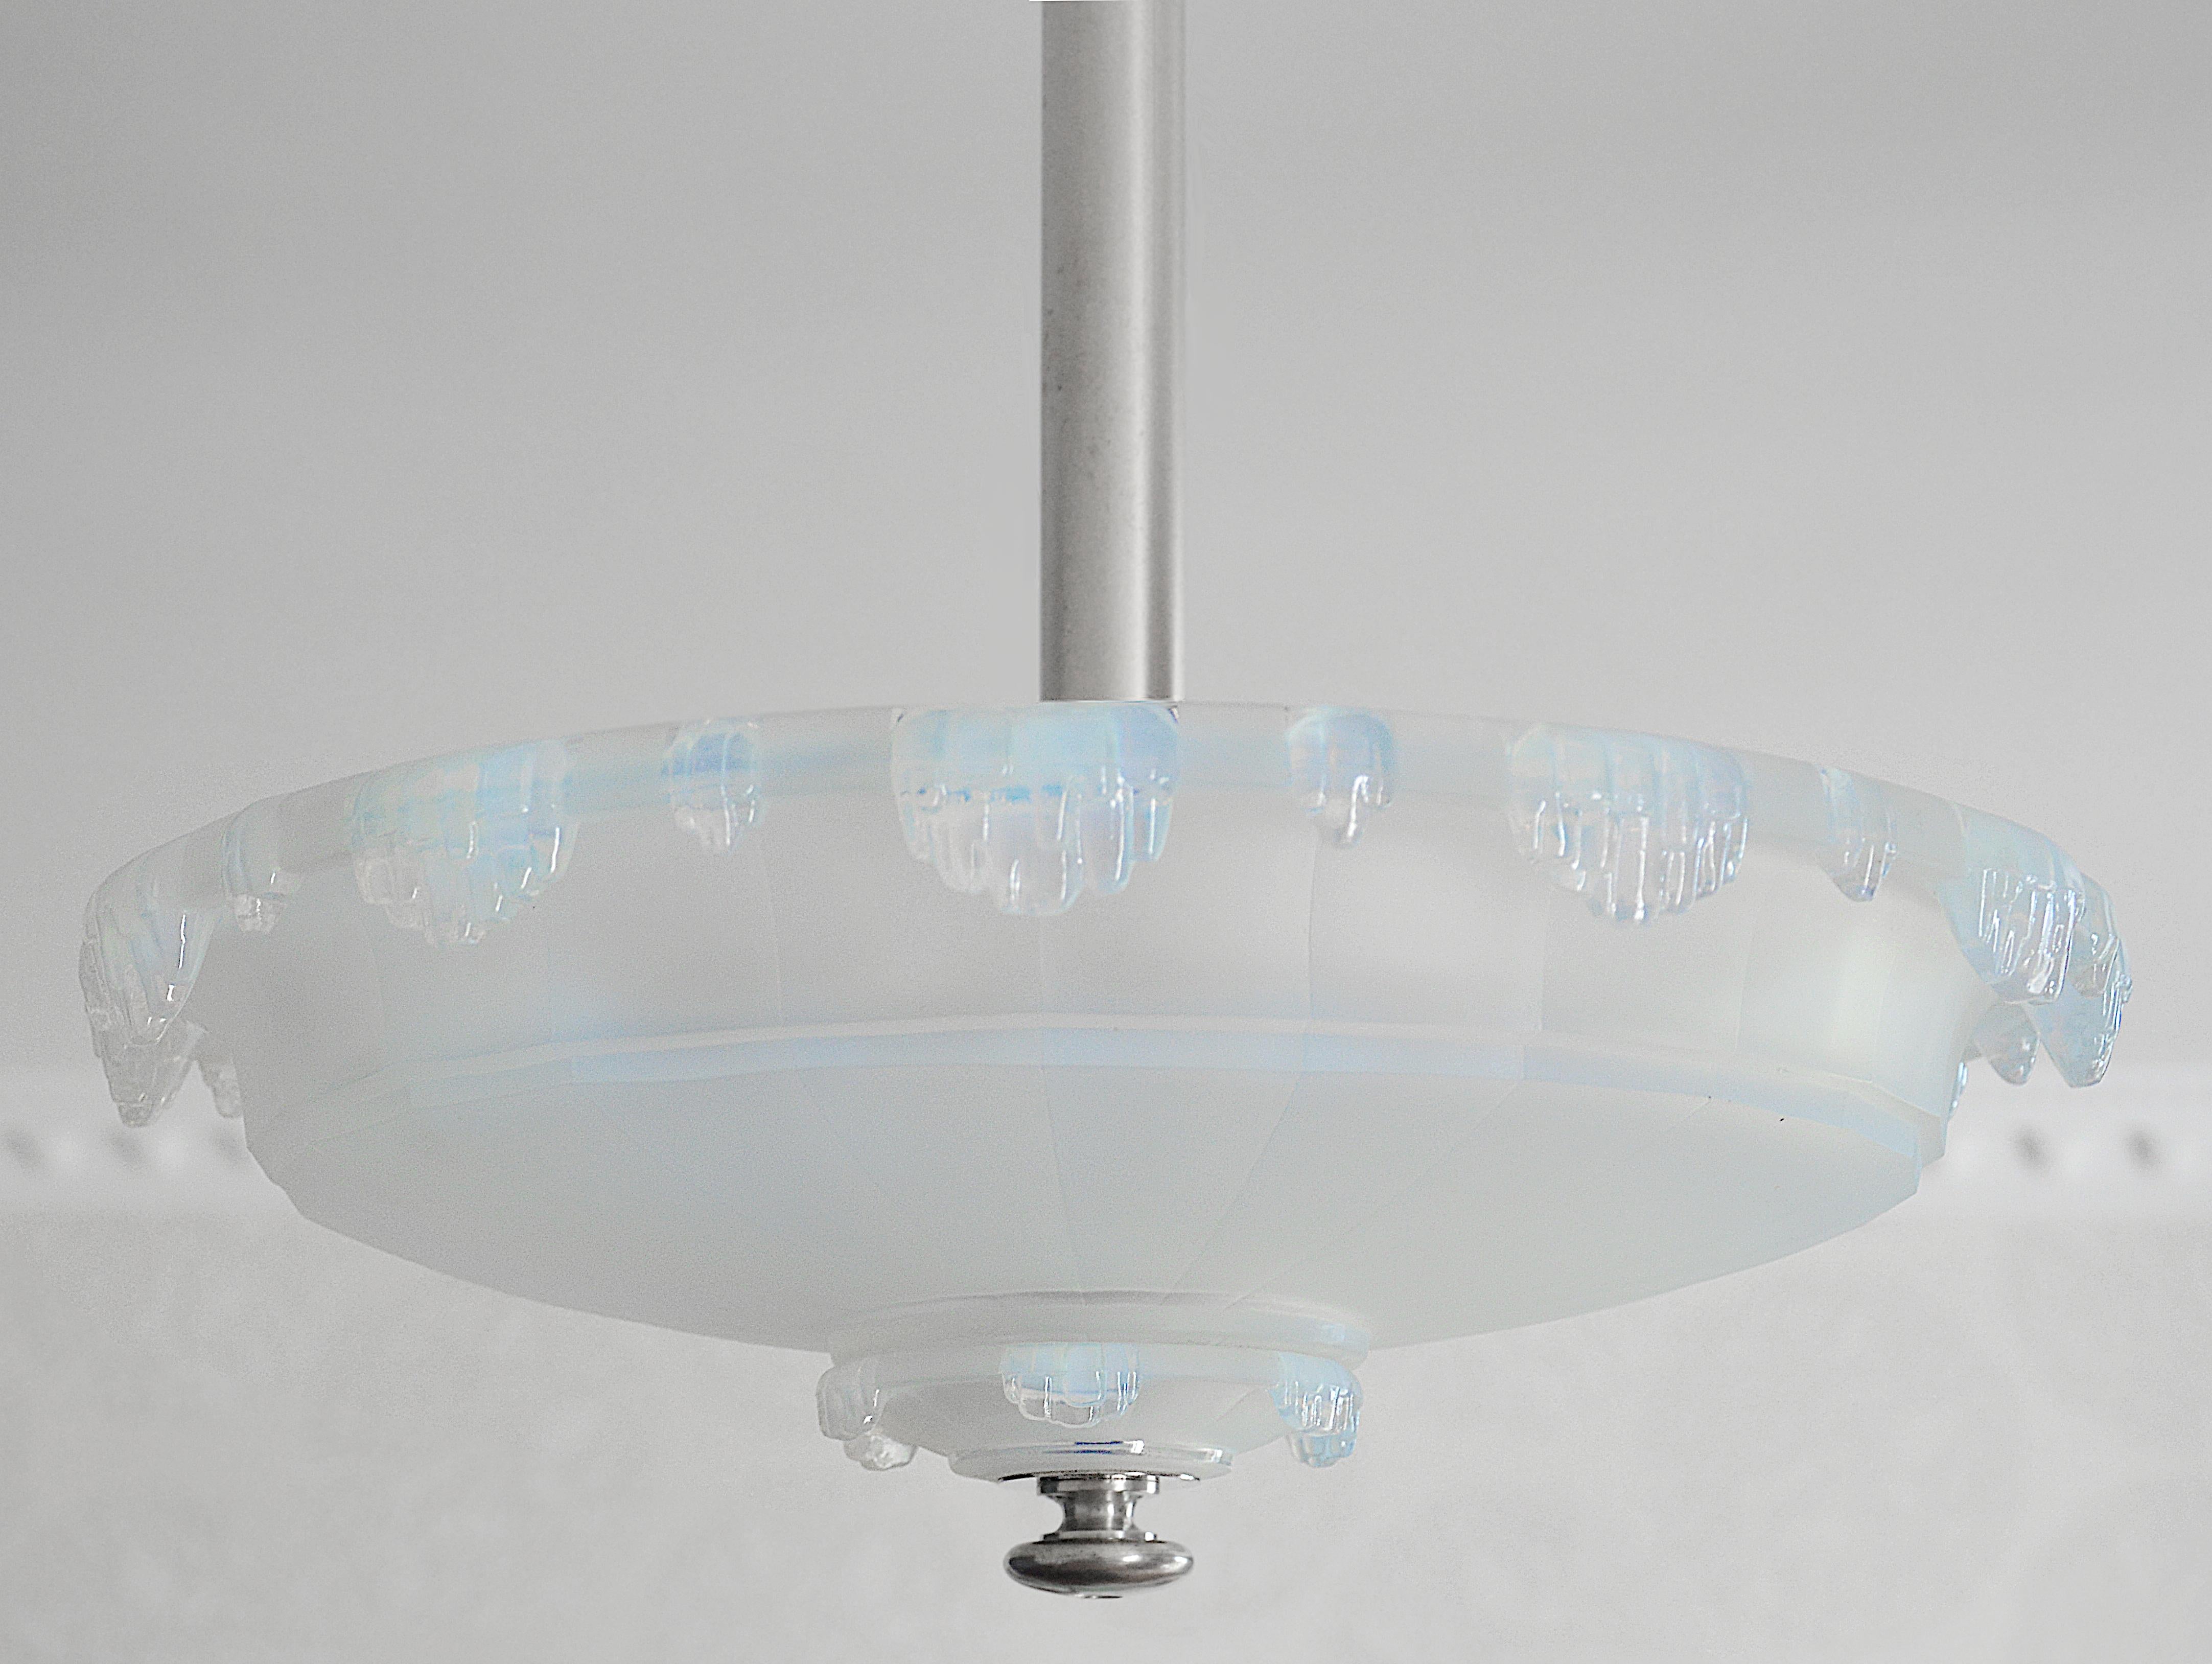 French Art Deco modernist opalescent pendant chandelier by Jean Gauthier, (Paris), France, circa 1925. Large thick opalescent glass shade hung at its silver plated brass frame. Same period as Lalique, Sabino, Etling. Measures: Height 20.5